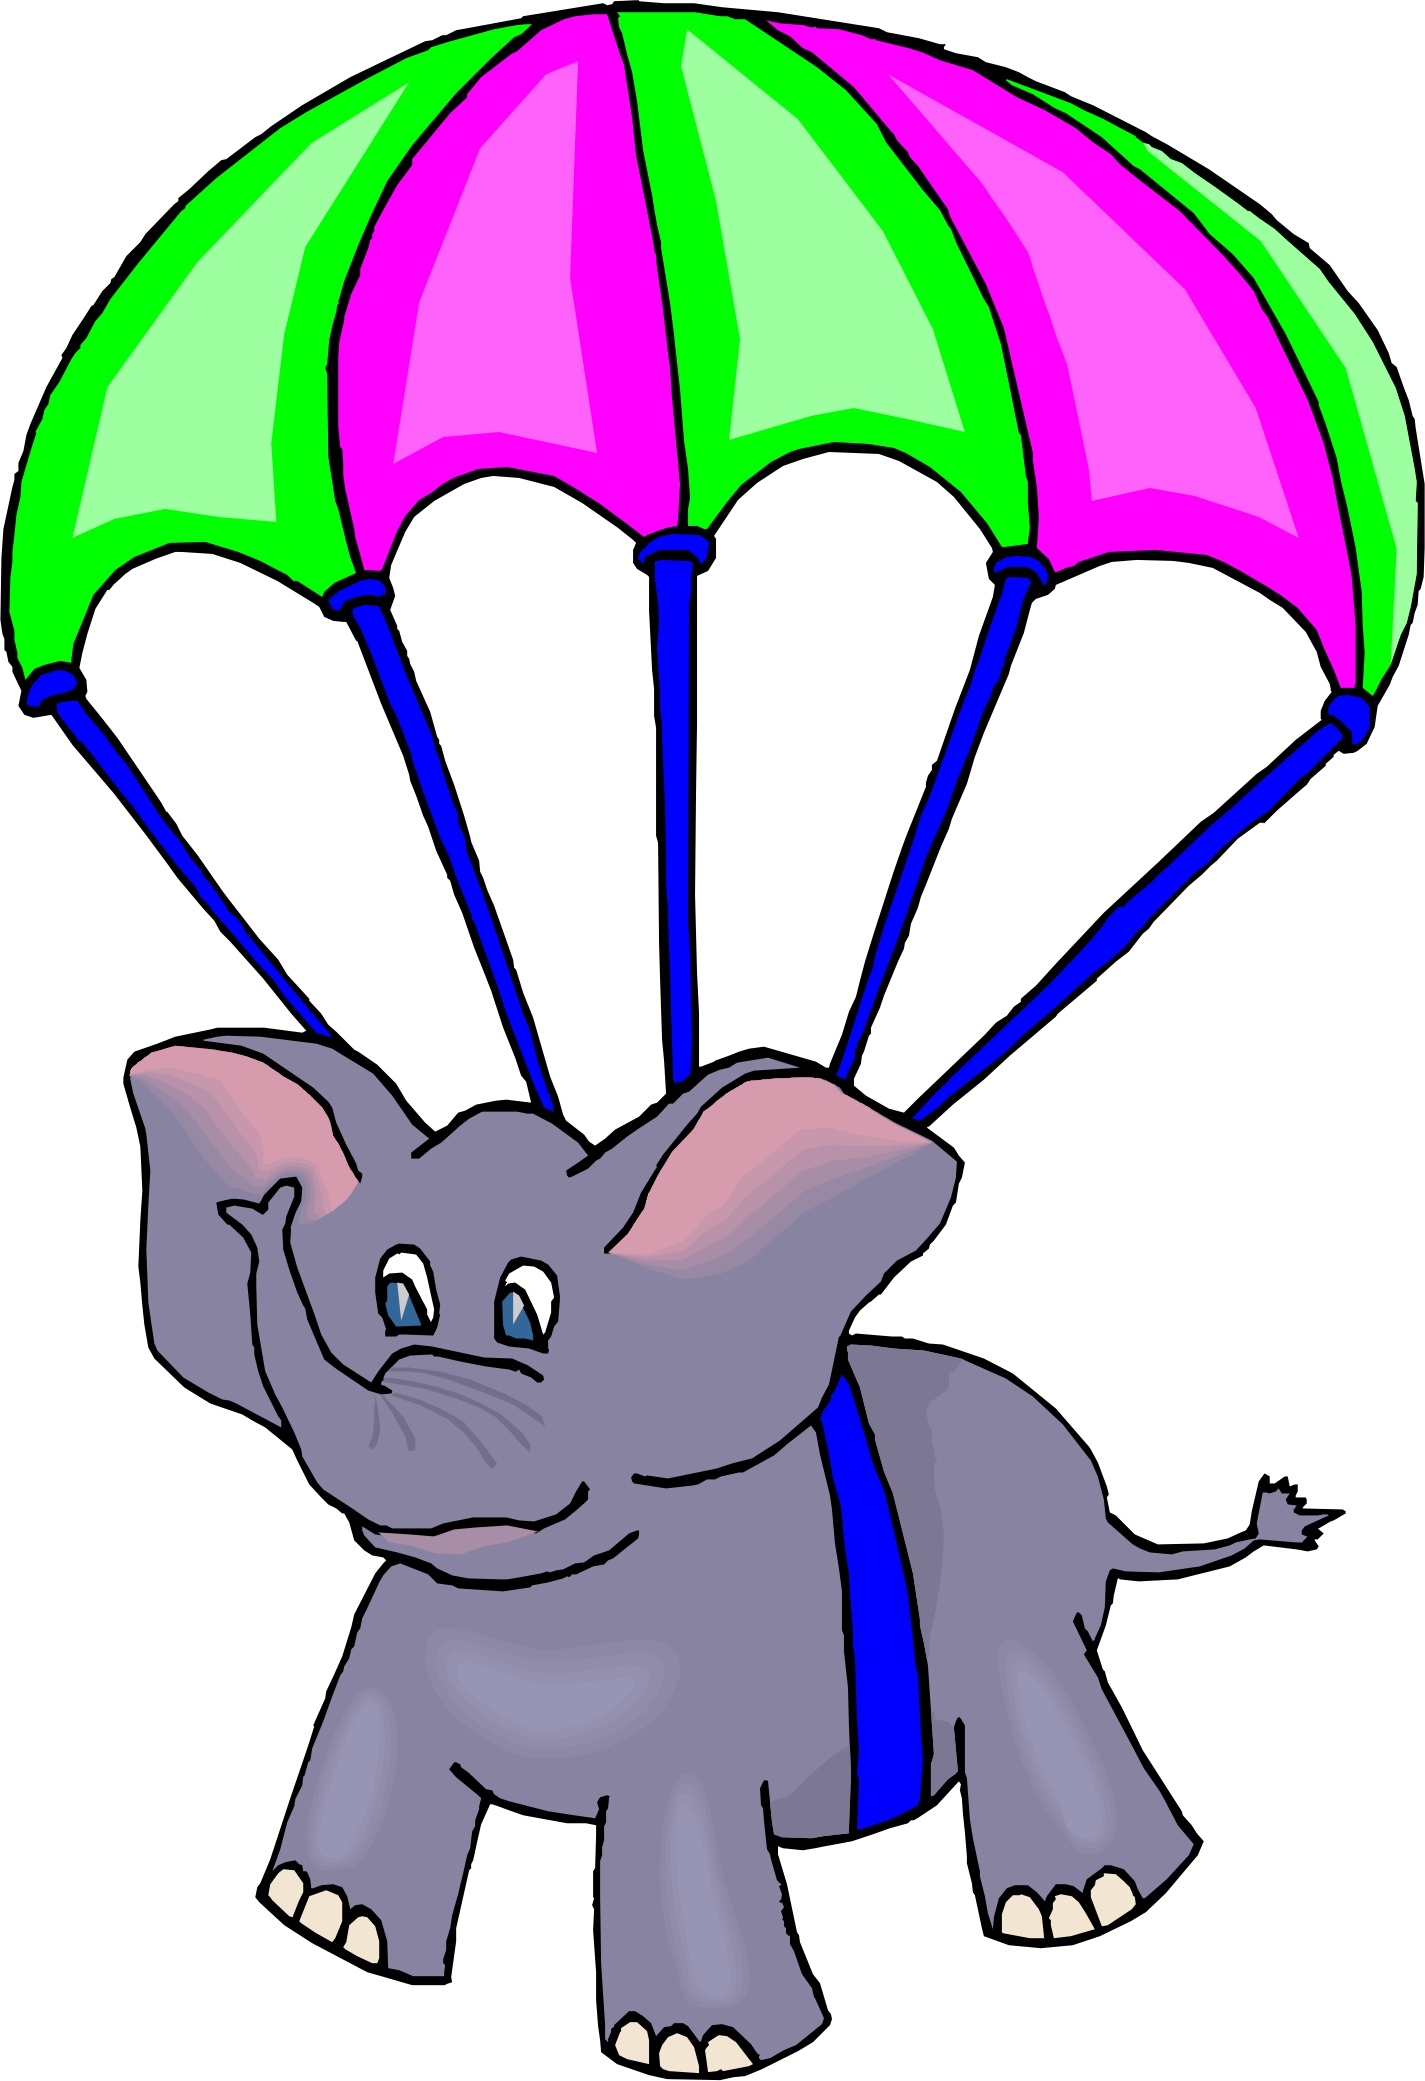 Parachute Cartoon Images & Pictures - Becuo